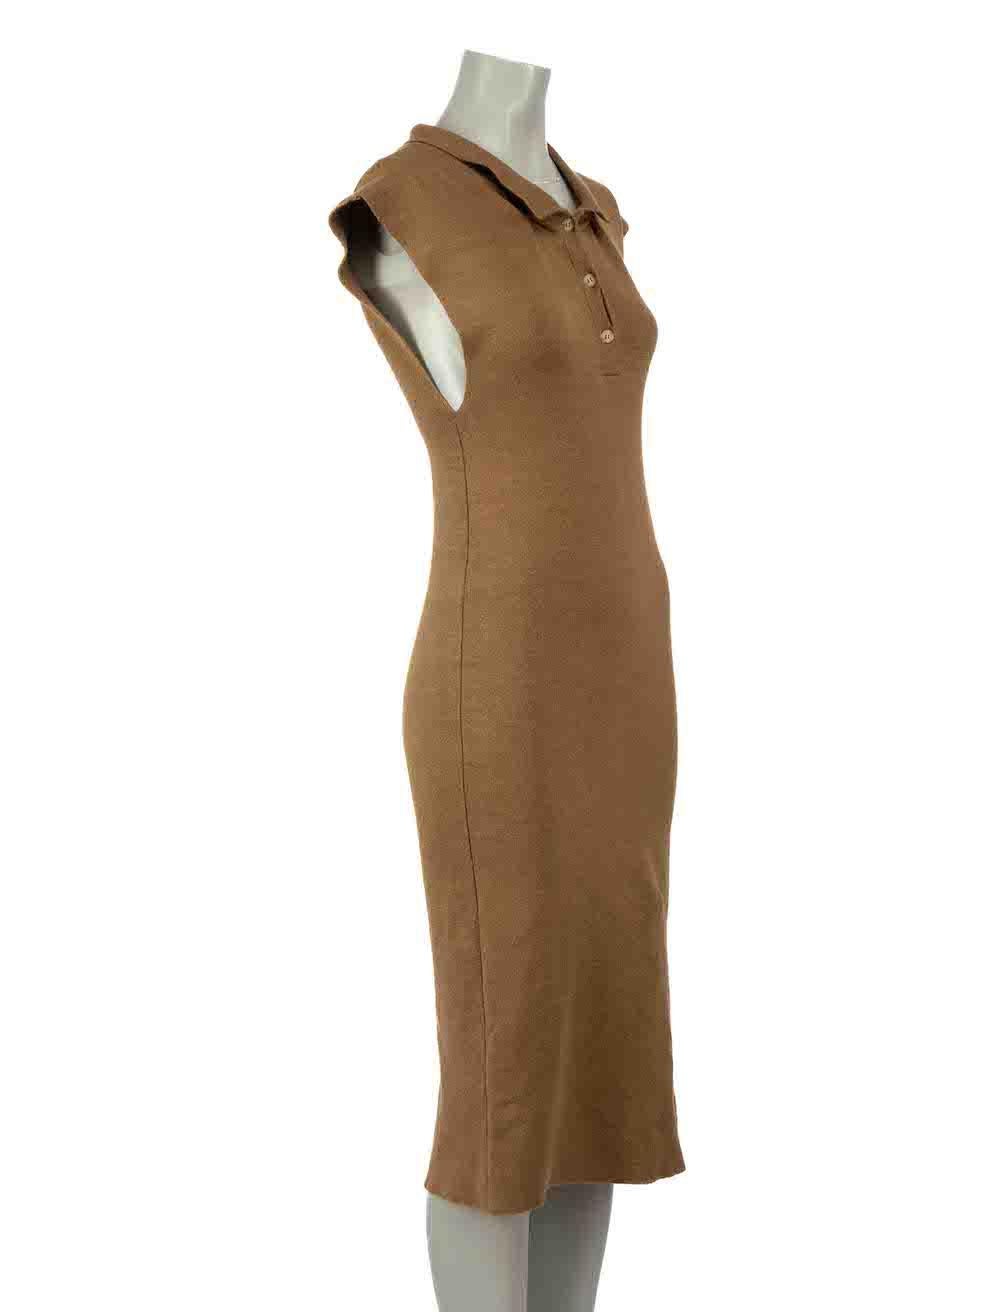 CONDITION is Very good. Minimal wear to dress is evident. Minor pulls to the front of the dress on this used Jacquemus designer resale item.
 
Details
La Robe Santon
Brown
Linen
Knit dress
Figure hugging fit
Sleeveless
Midi
Polo neck
Button up